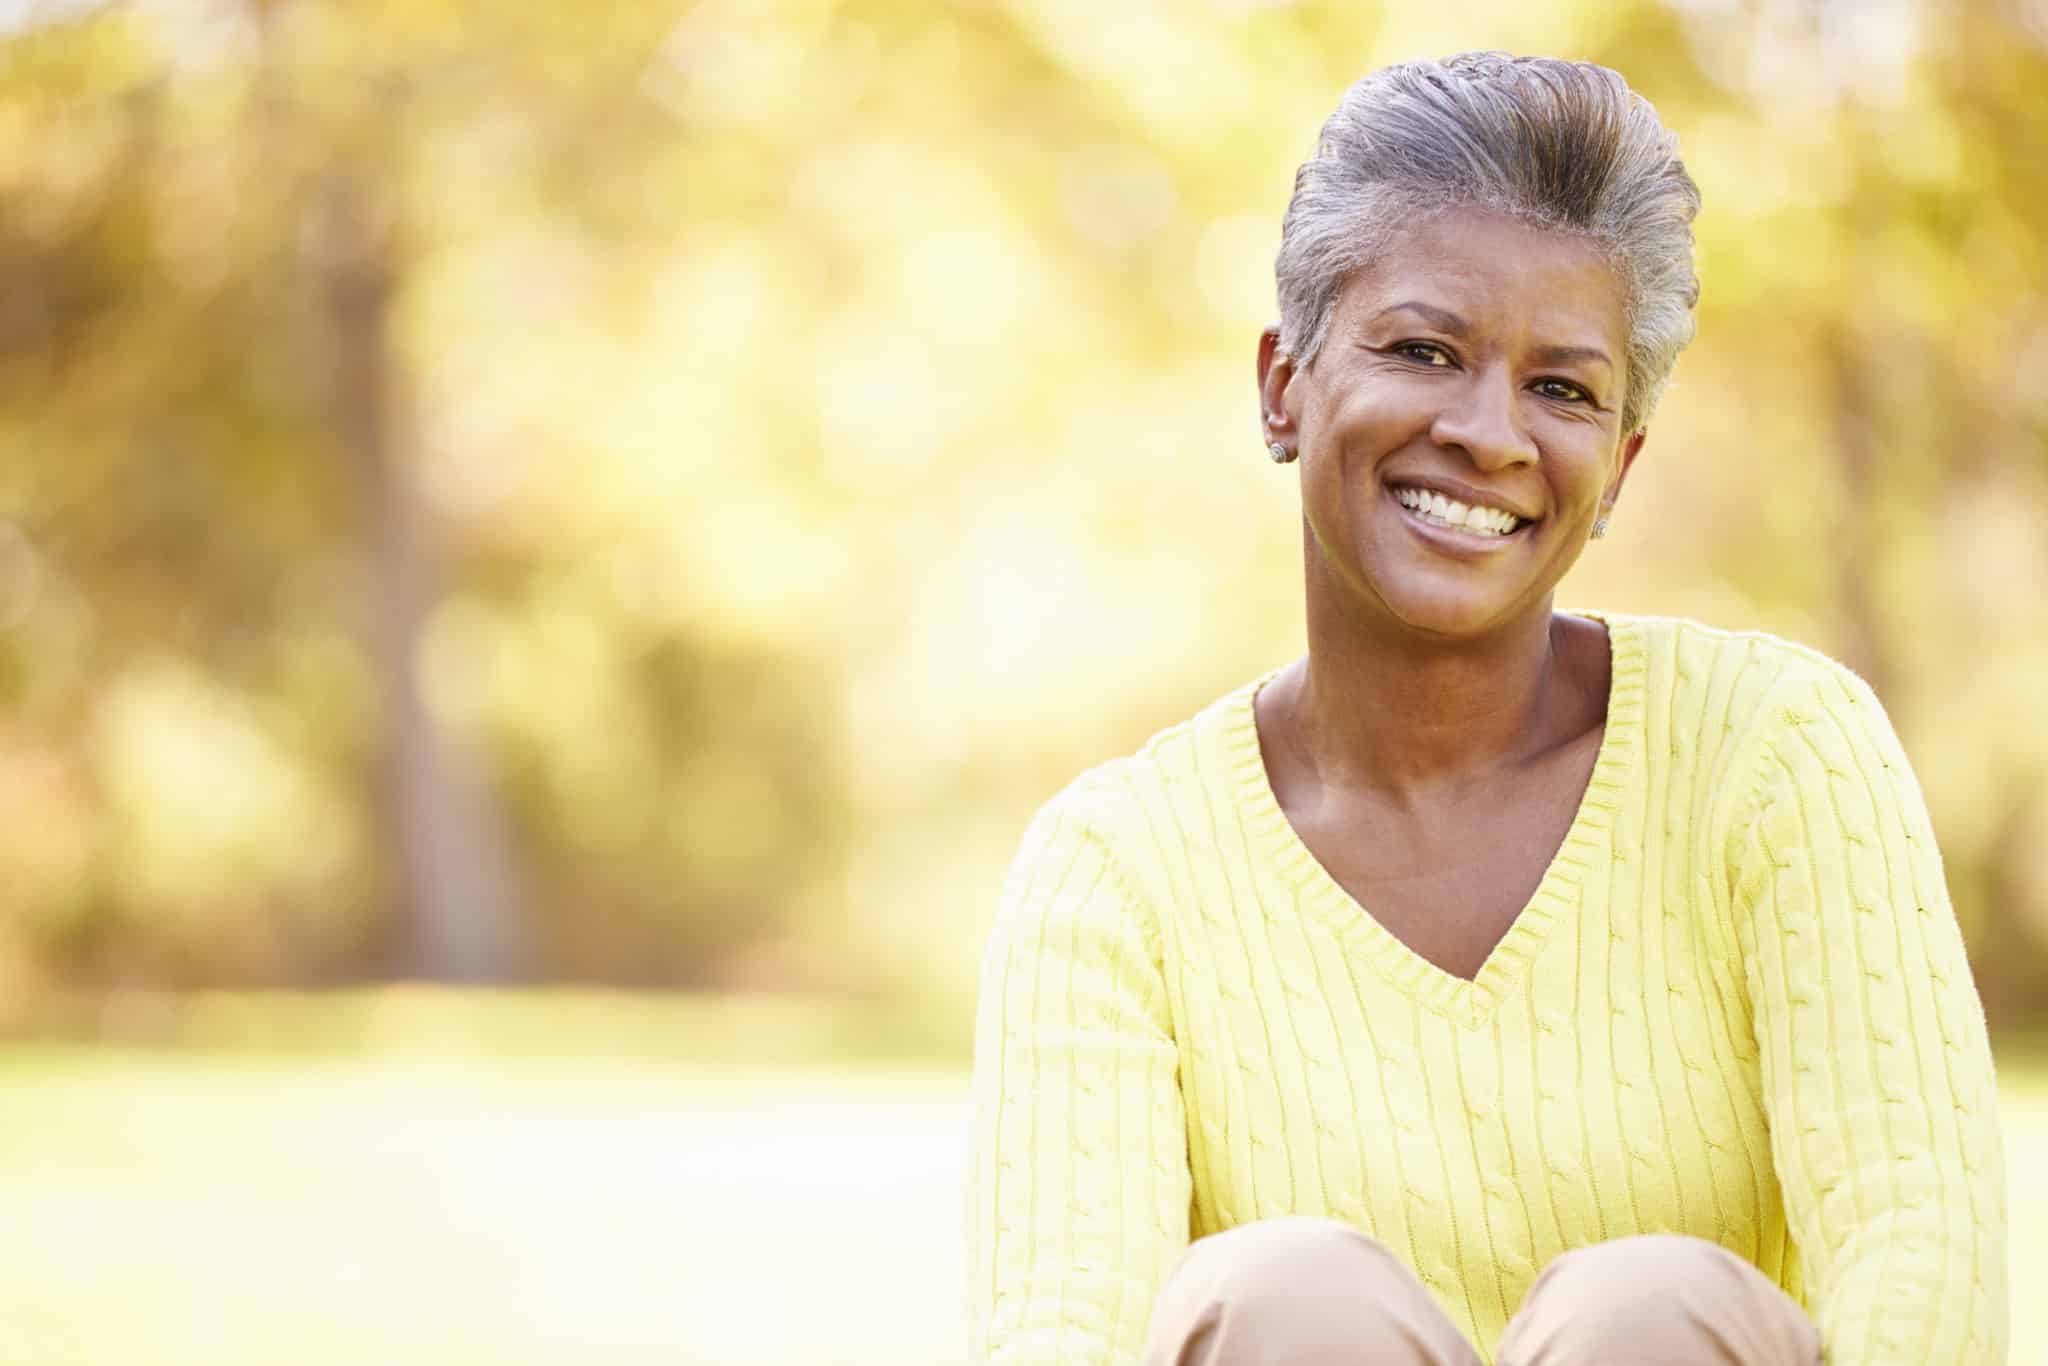 woman over 50 smiling outdoors in yellow sweater